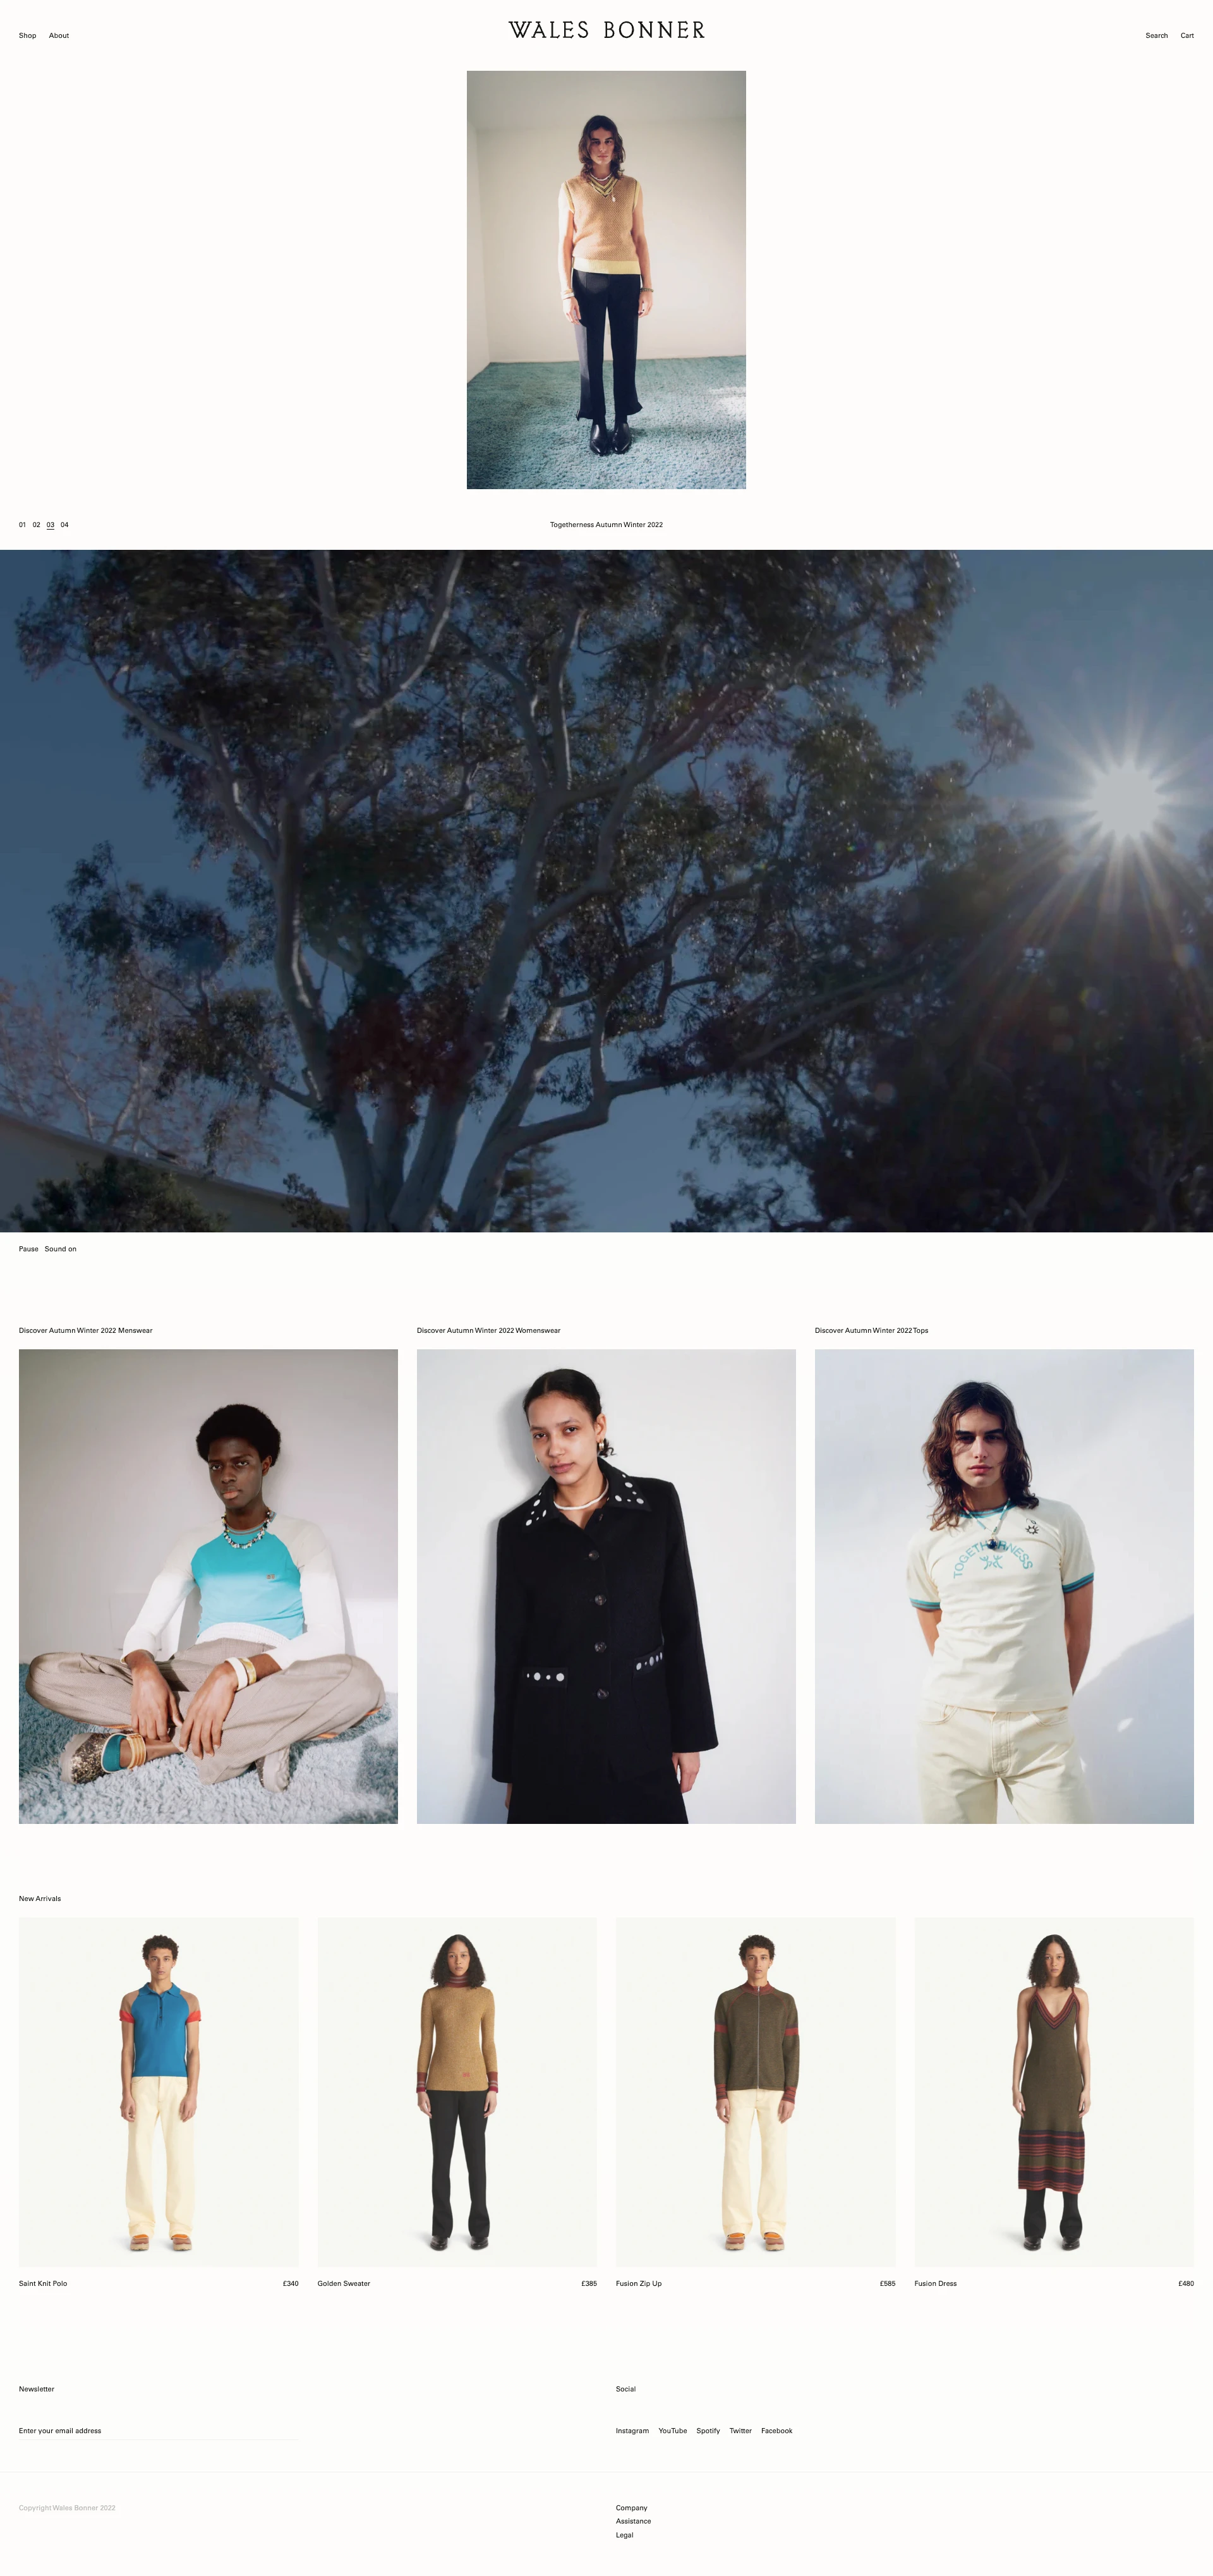 Wales Bonner Landing Page Example: Established in 2014 by Grace Wales Bonner as a menswear brand, Wales Bonner’s soulful tailoring soon expanded to womenswear. Discover the latest collections.